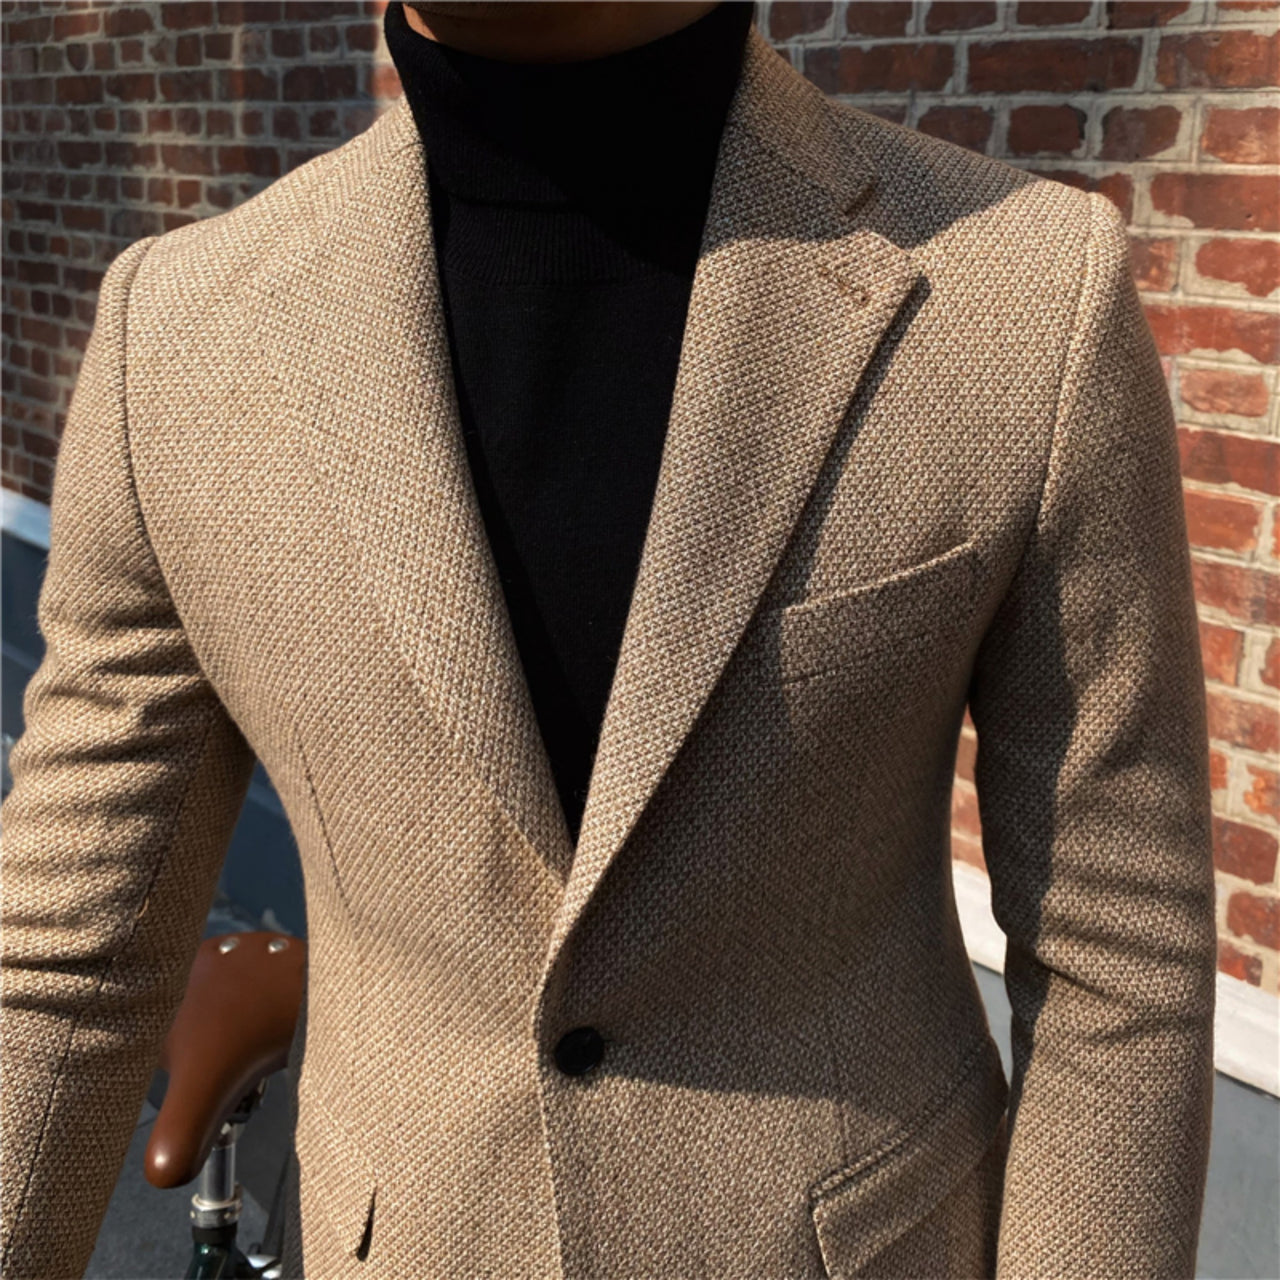 Thick And Textured Small Suit Jacket For Men